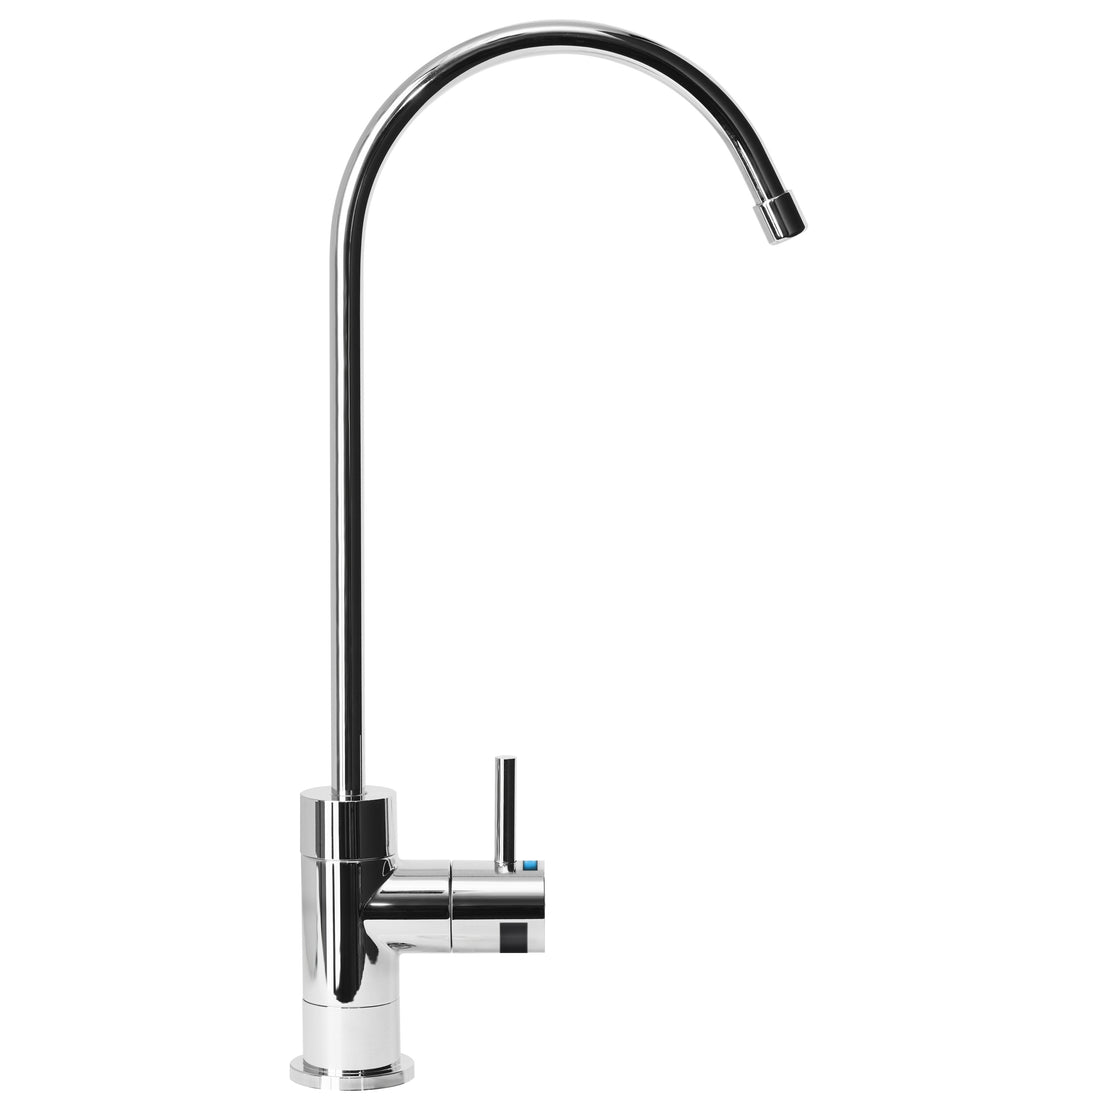 Designer Series Contemporary Styled Drinking Water Designer Faucet with Ceramic Disc Valve and LED faucet (Chrome)